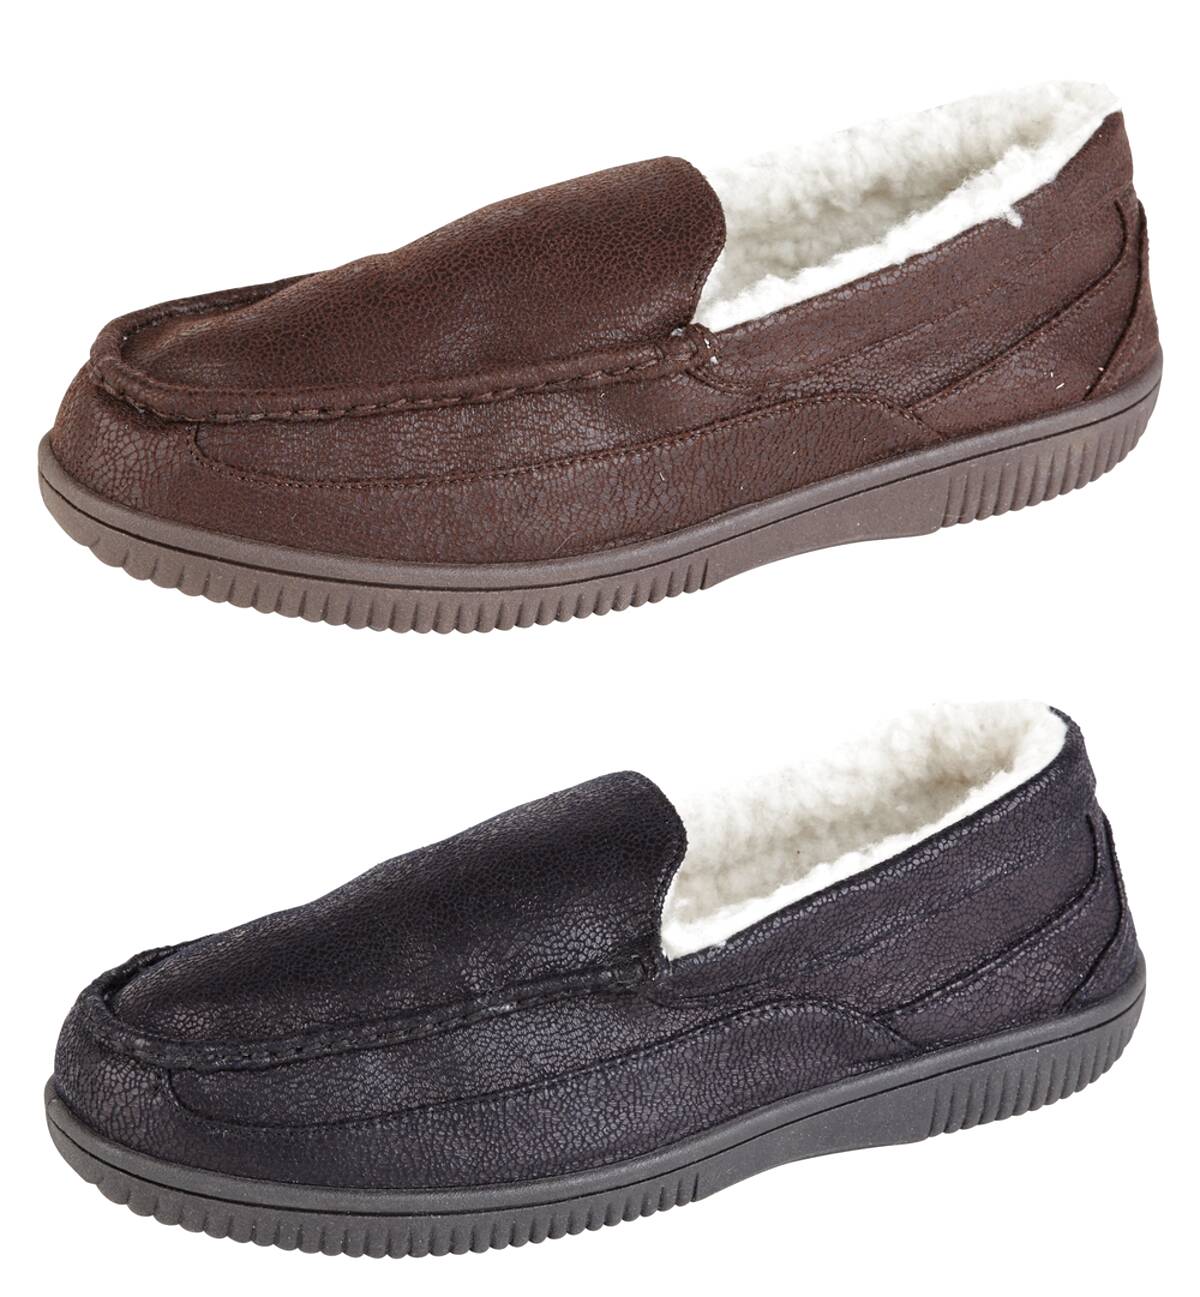 Mens Fur Lined Slippers for sale in UK | 64 used Mens Fur Lined Slippers